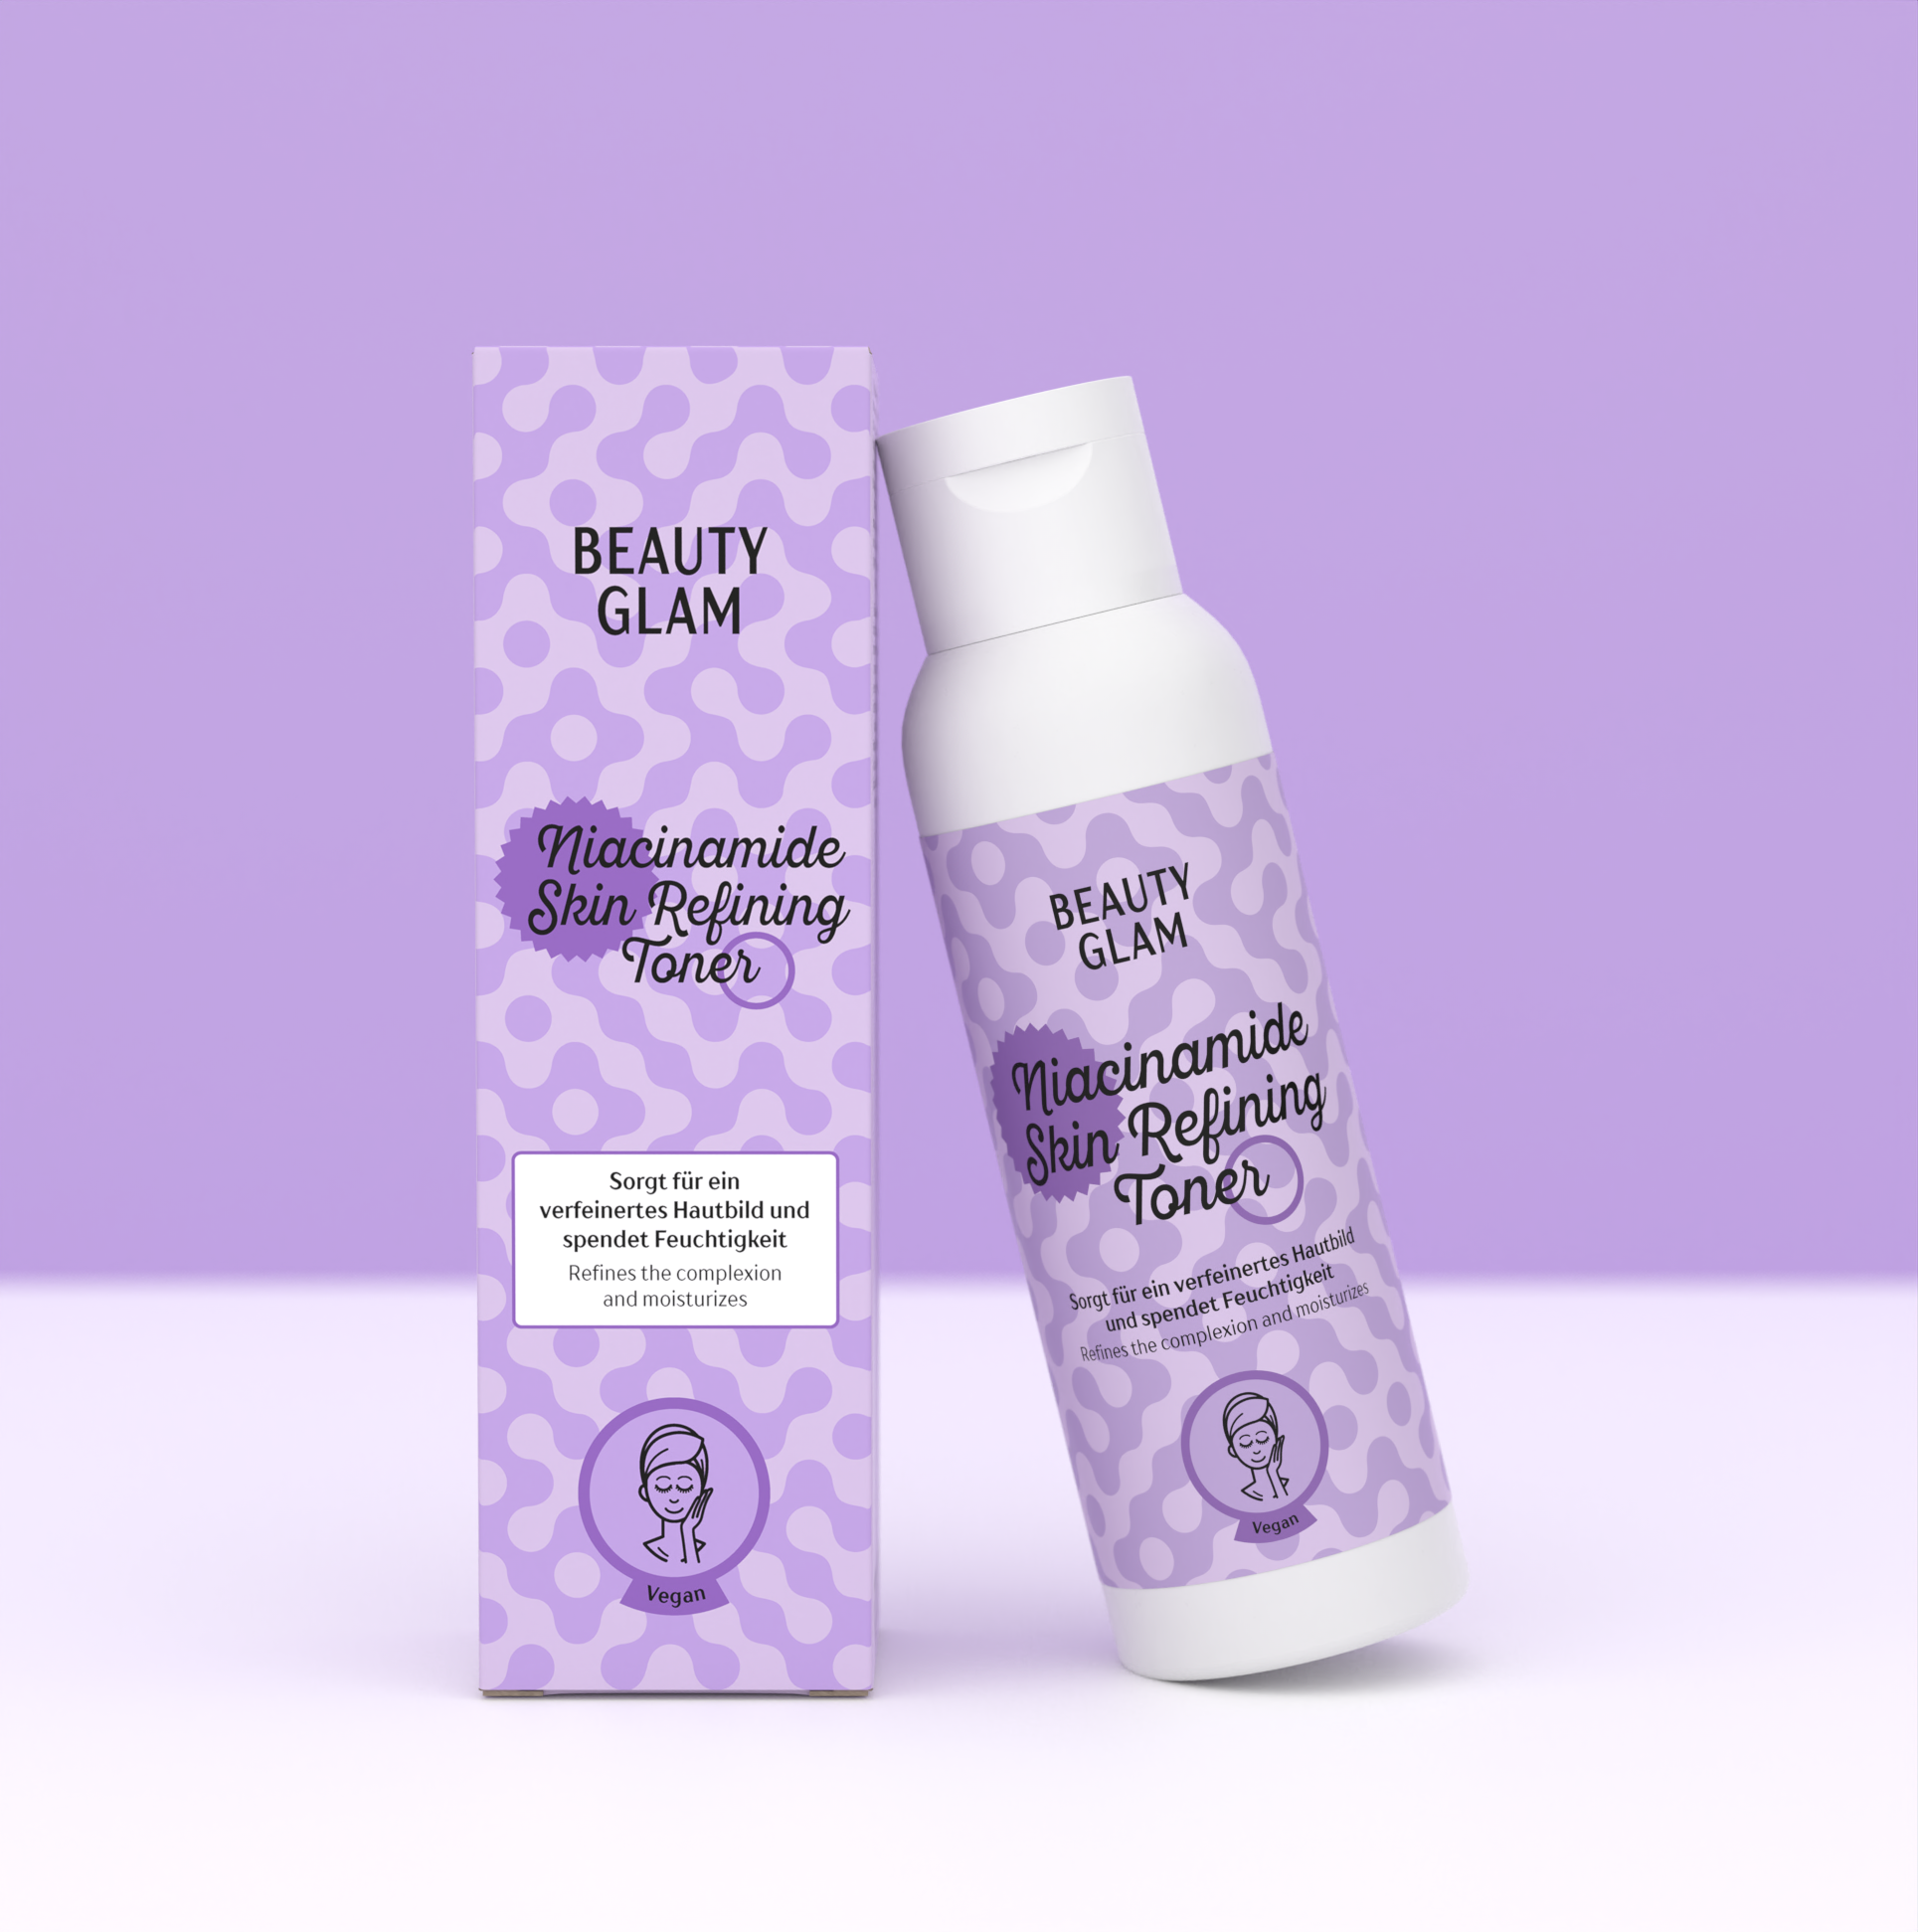 Beauty Glam Niacinamide Cleansing Duo